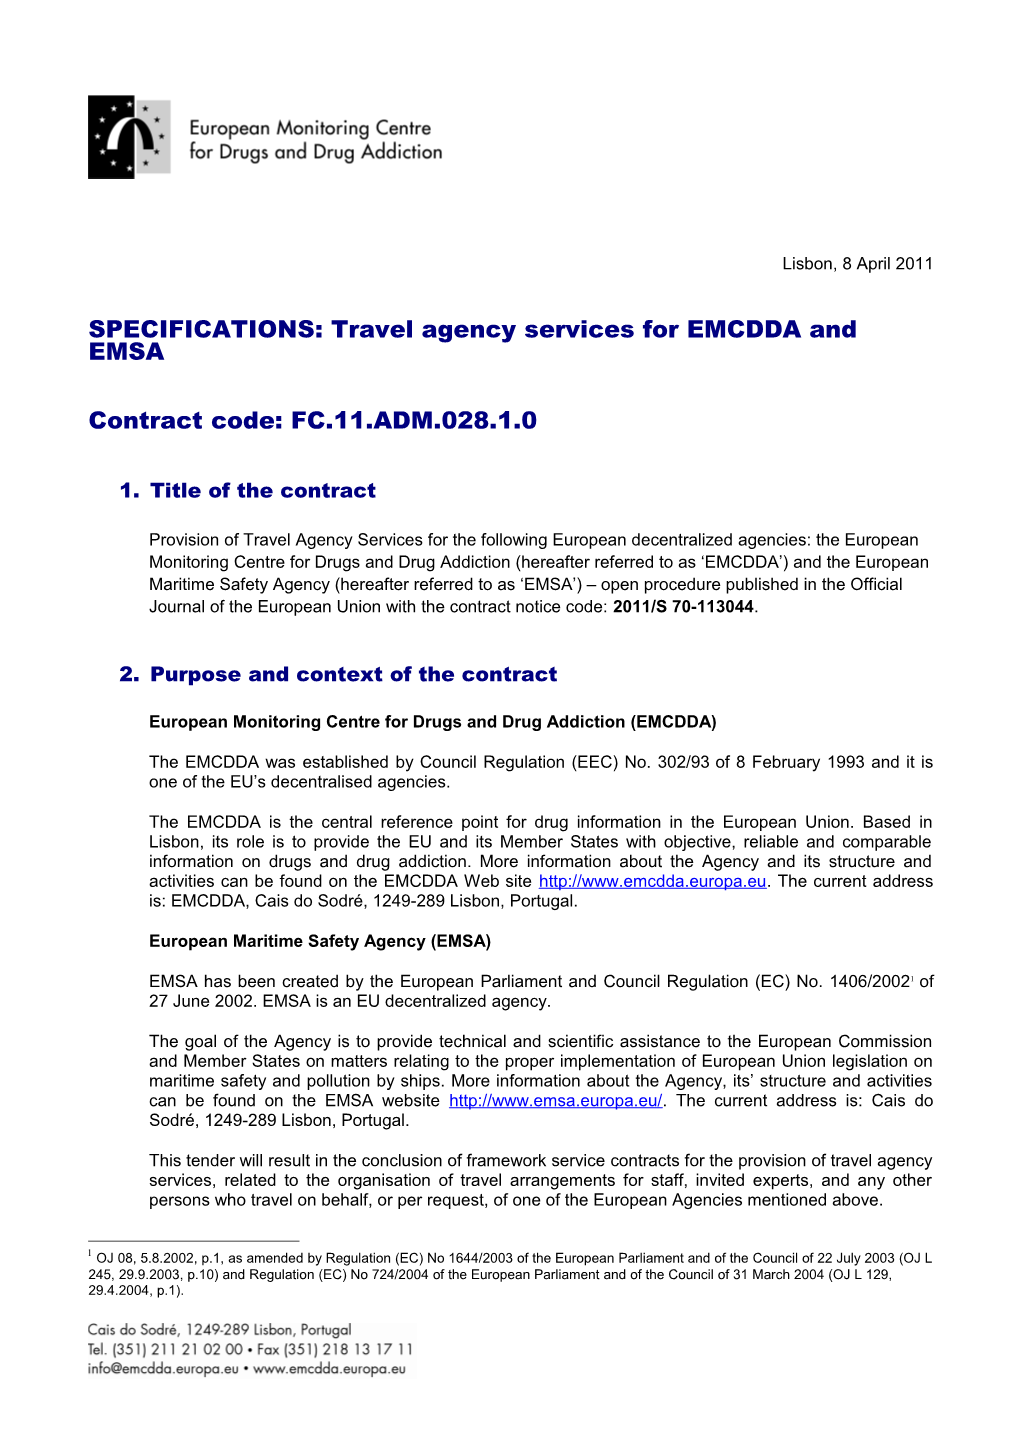 Specifications: Travel Agency Services for EMCDDA and EMSA